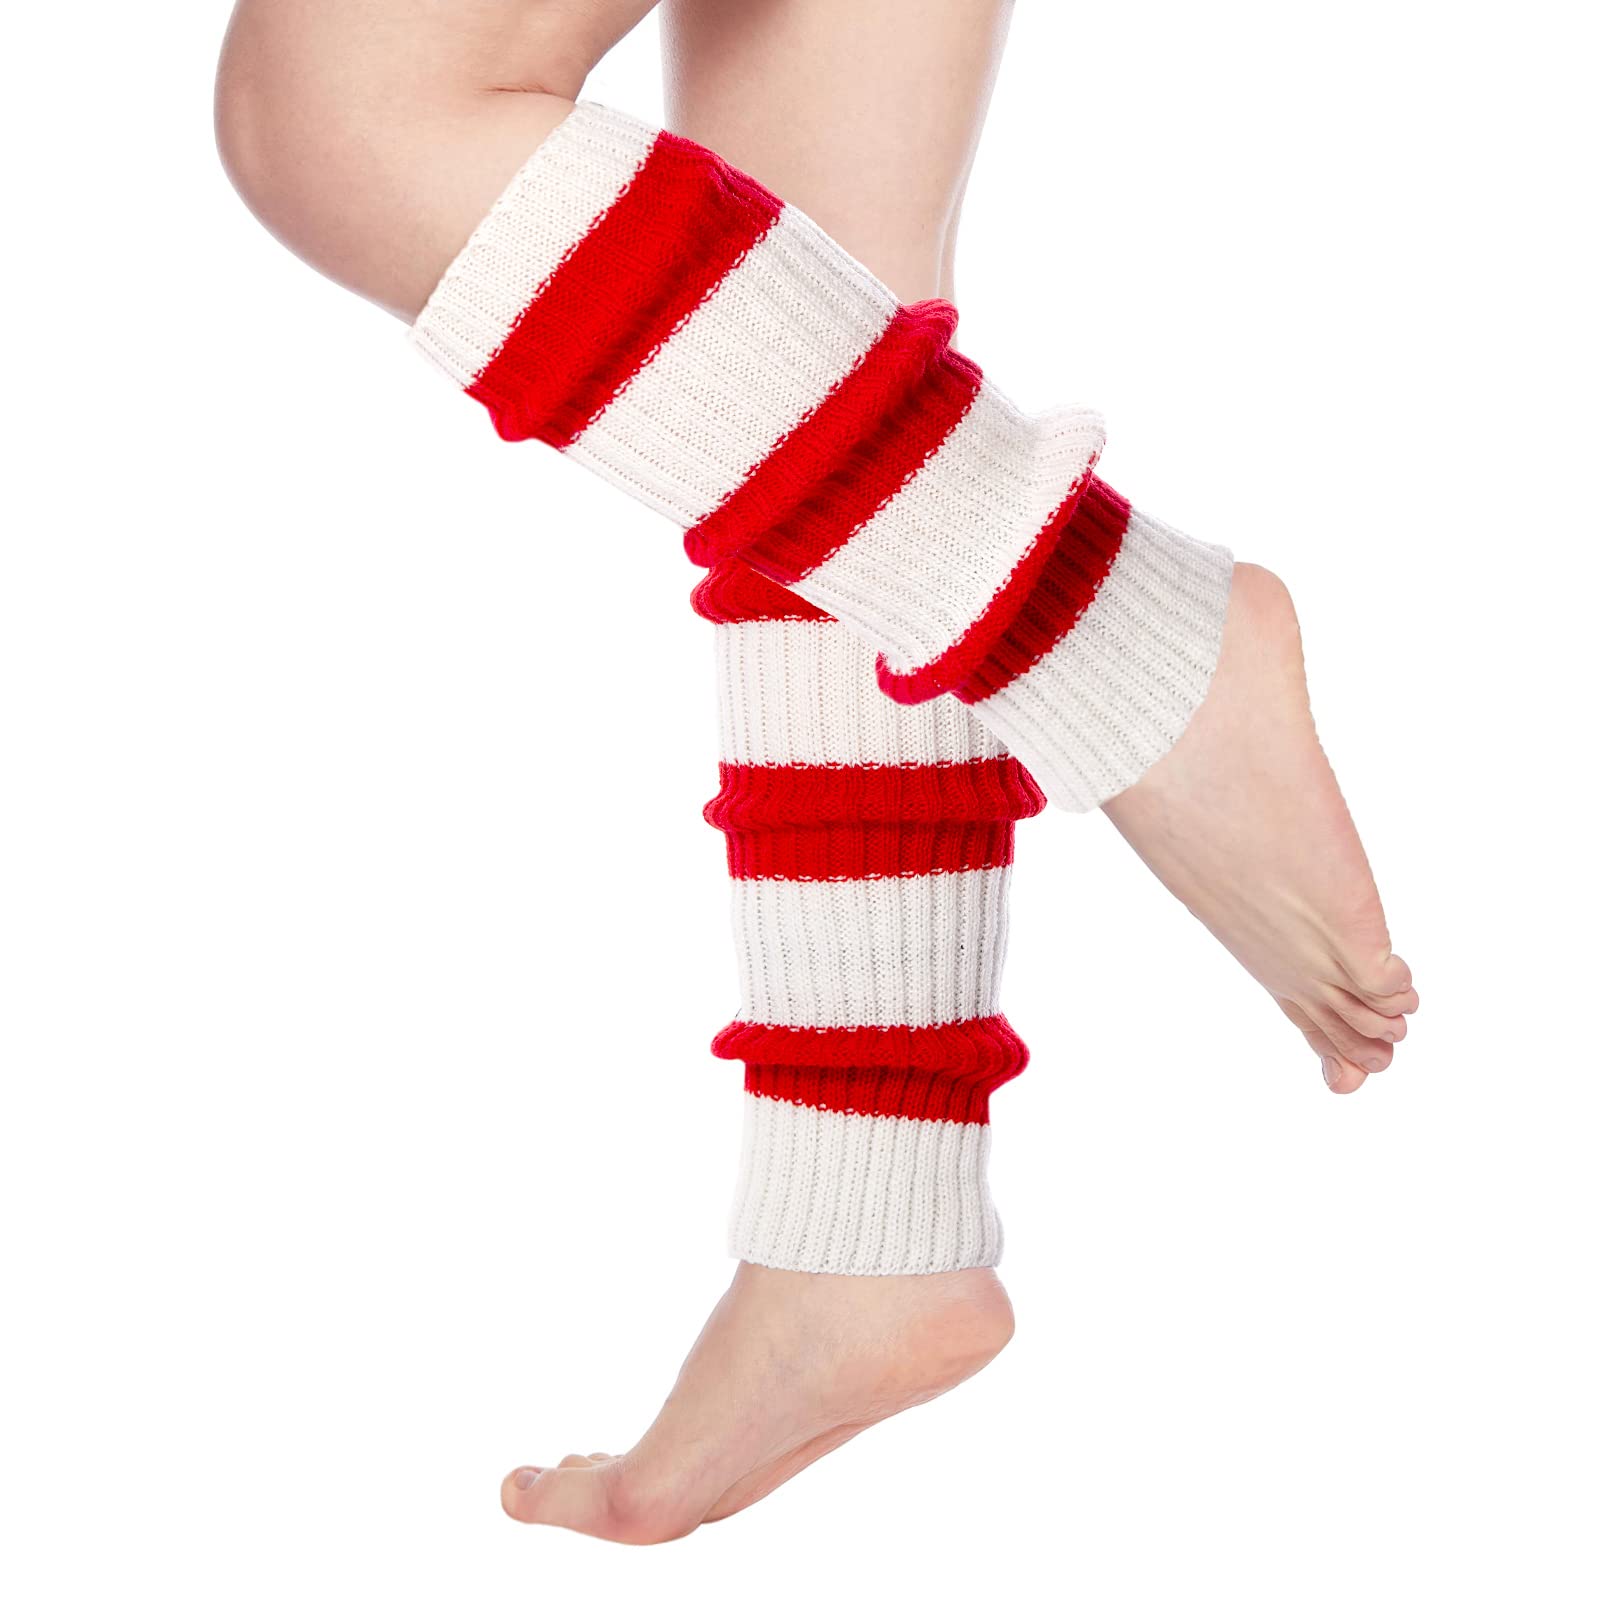 Womens Leg Warmers Neon Knitted for 80s Party Sports Yoga-Christmas white & Red - Moon Wood